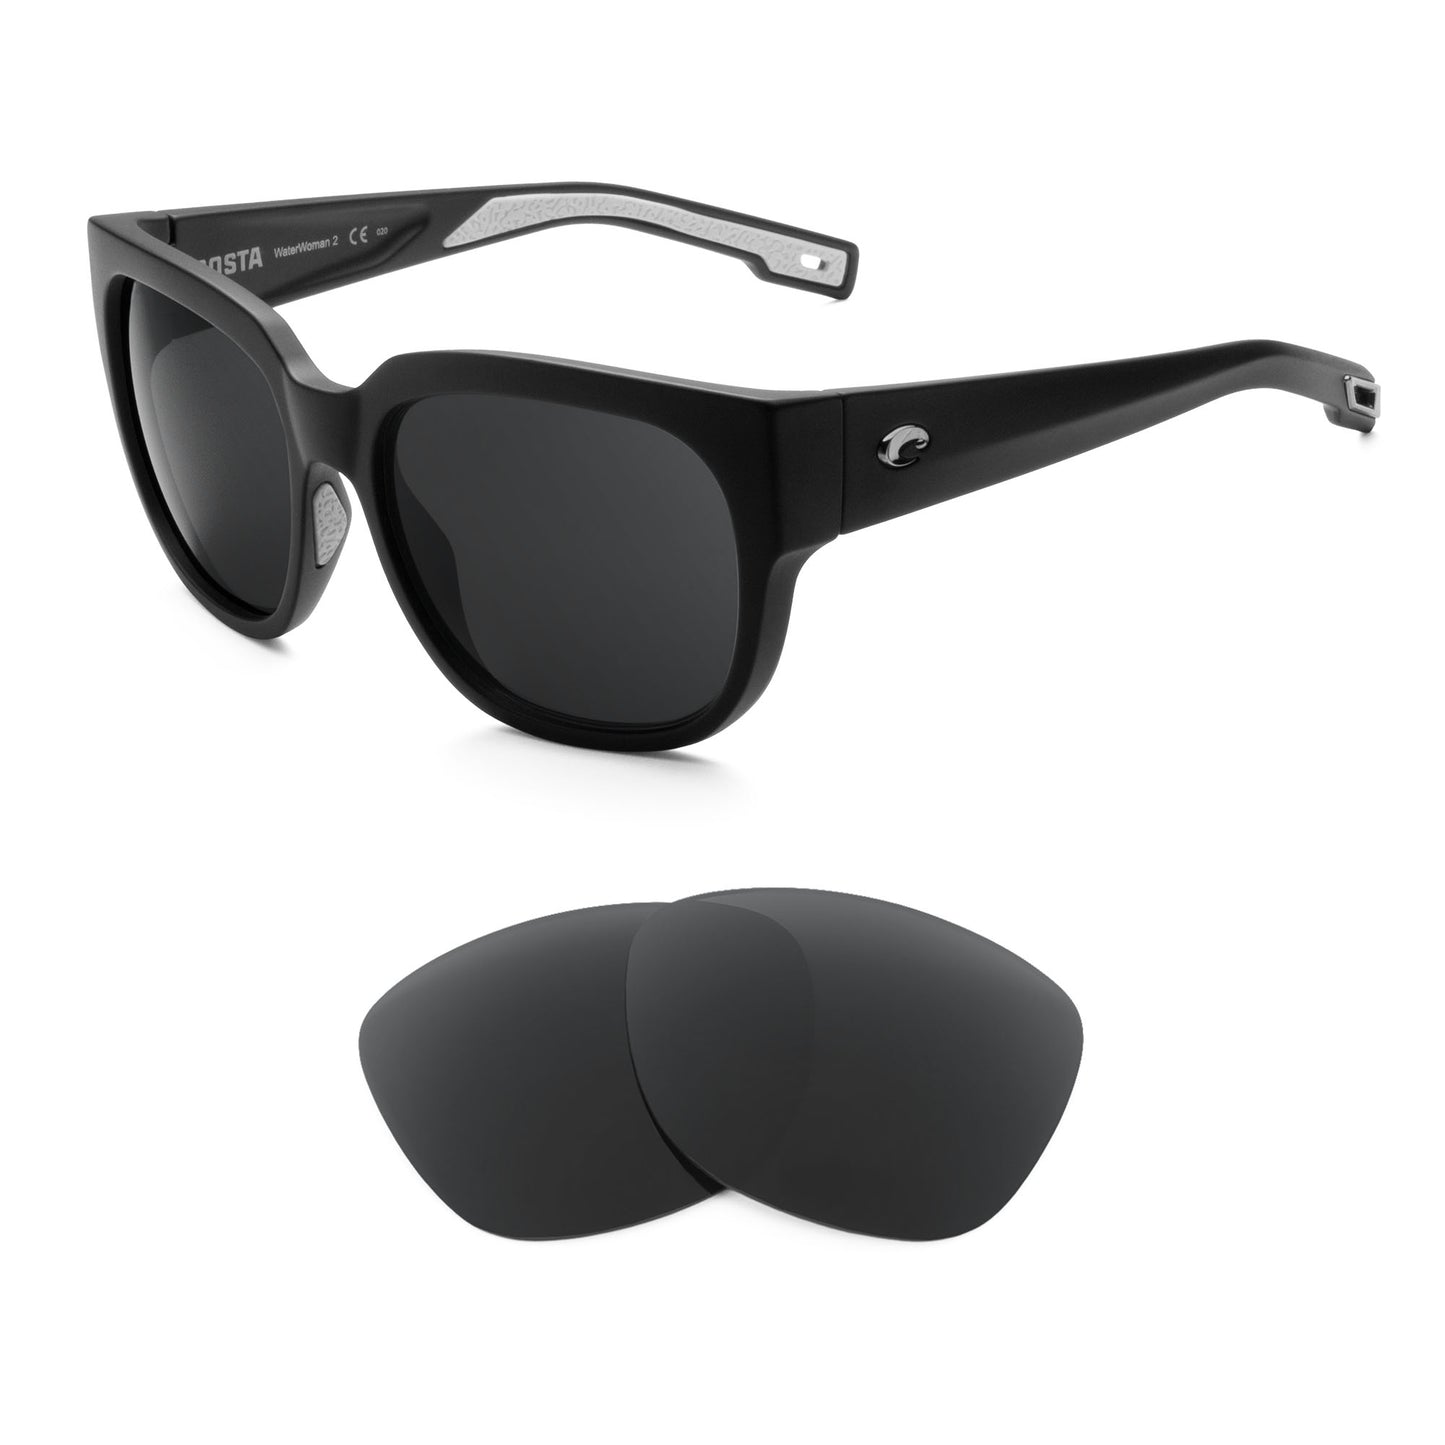 Costa Waterwoman 2 sunglasses with replacement lenses